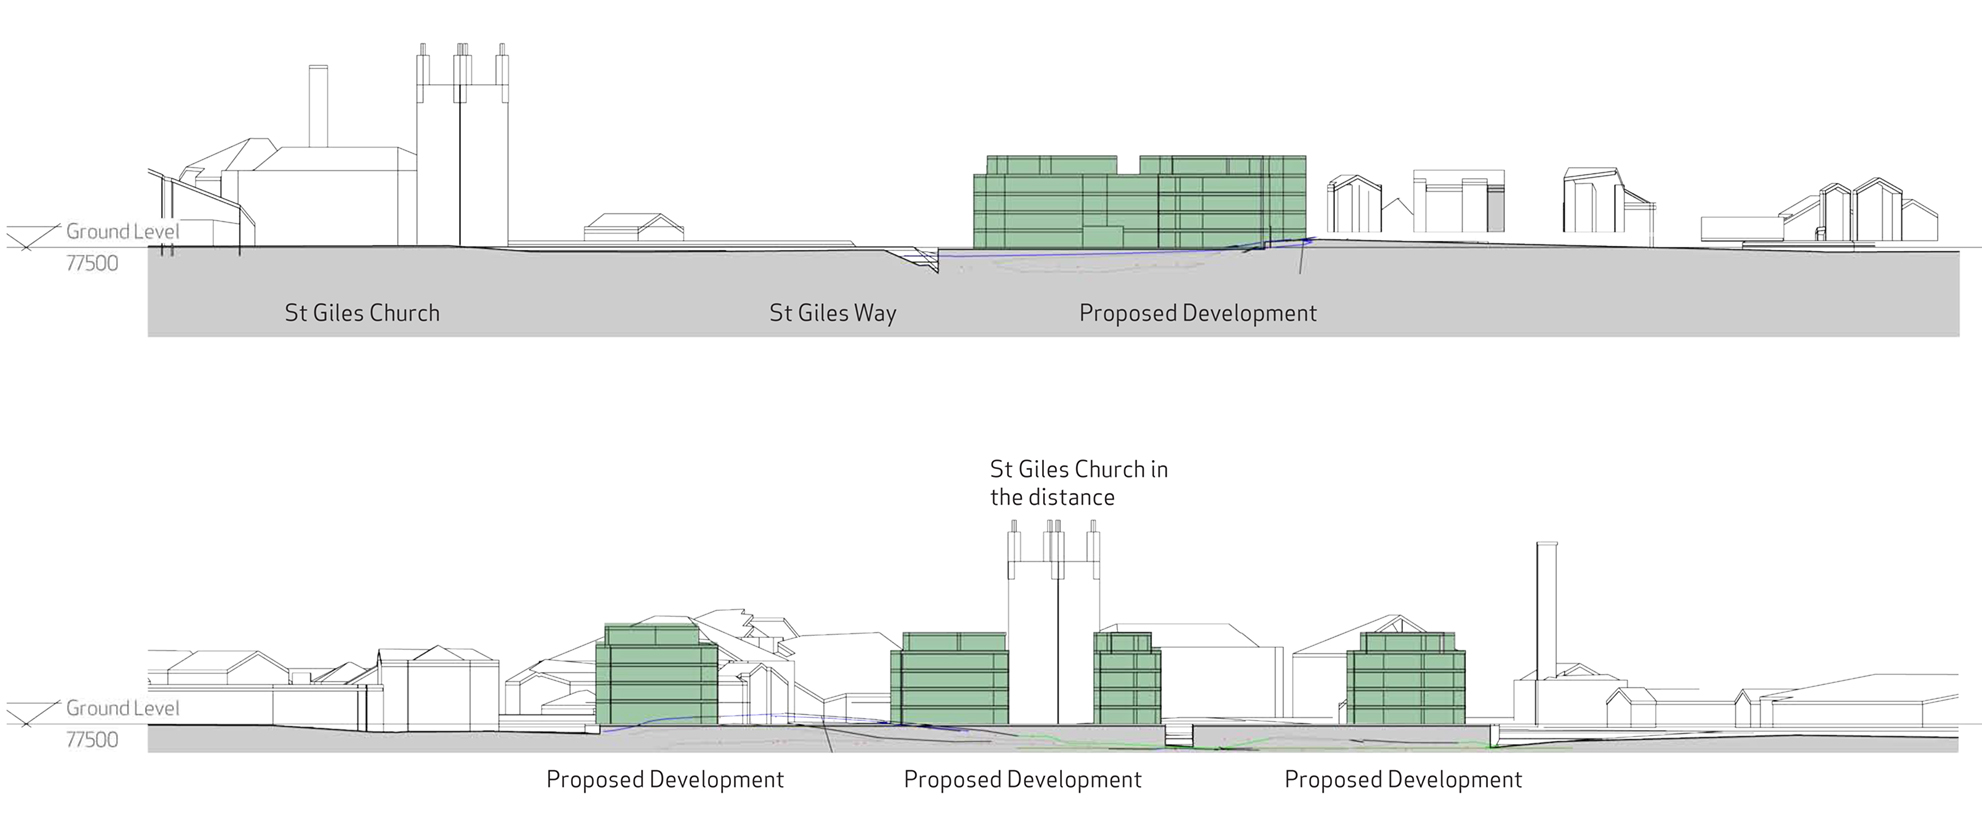 Proposed Mixed-Use Development, Wrexham Site Massing